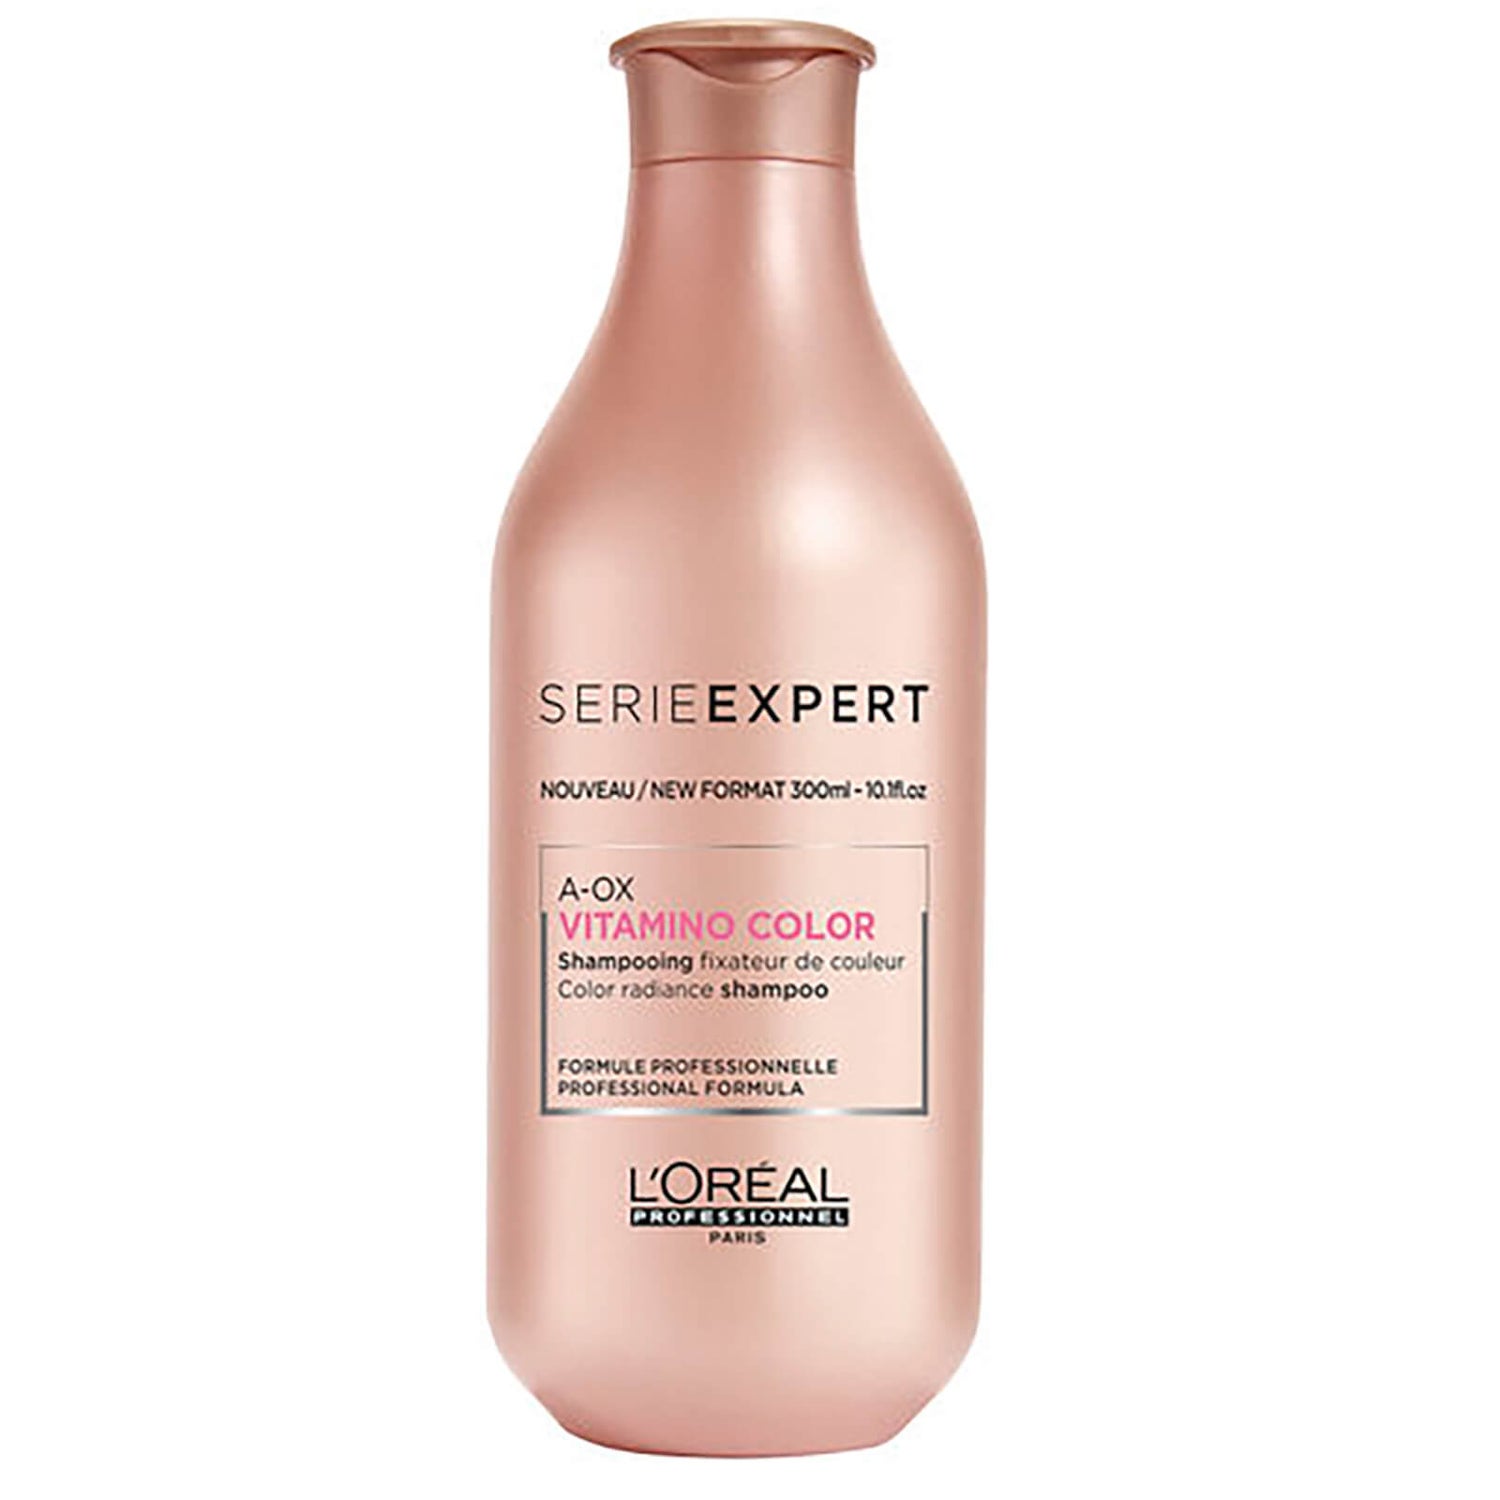 Achieve salon style results with the Serie Expert Vitamino Color Shampoo fr...